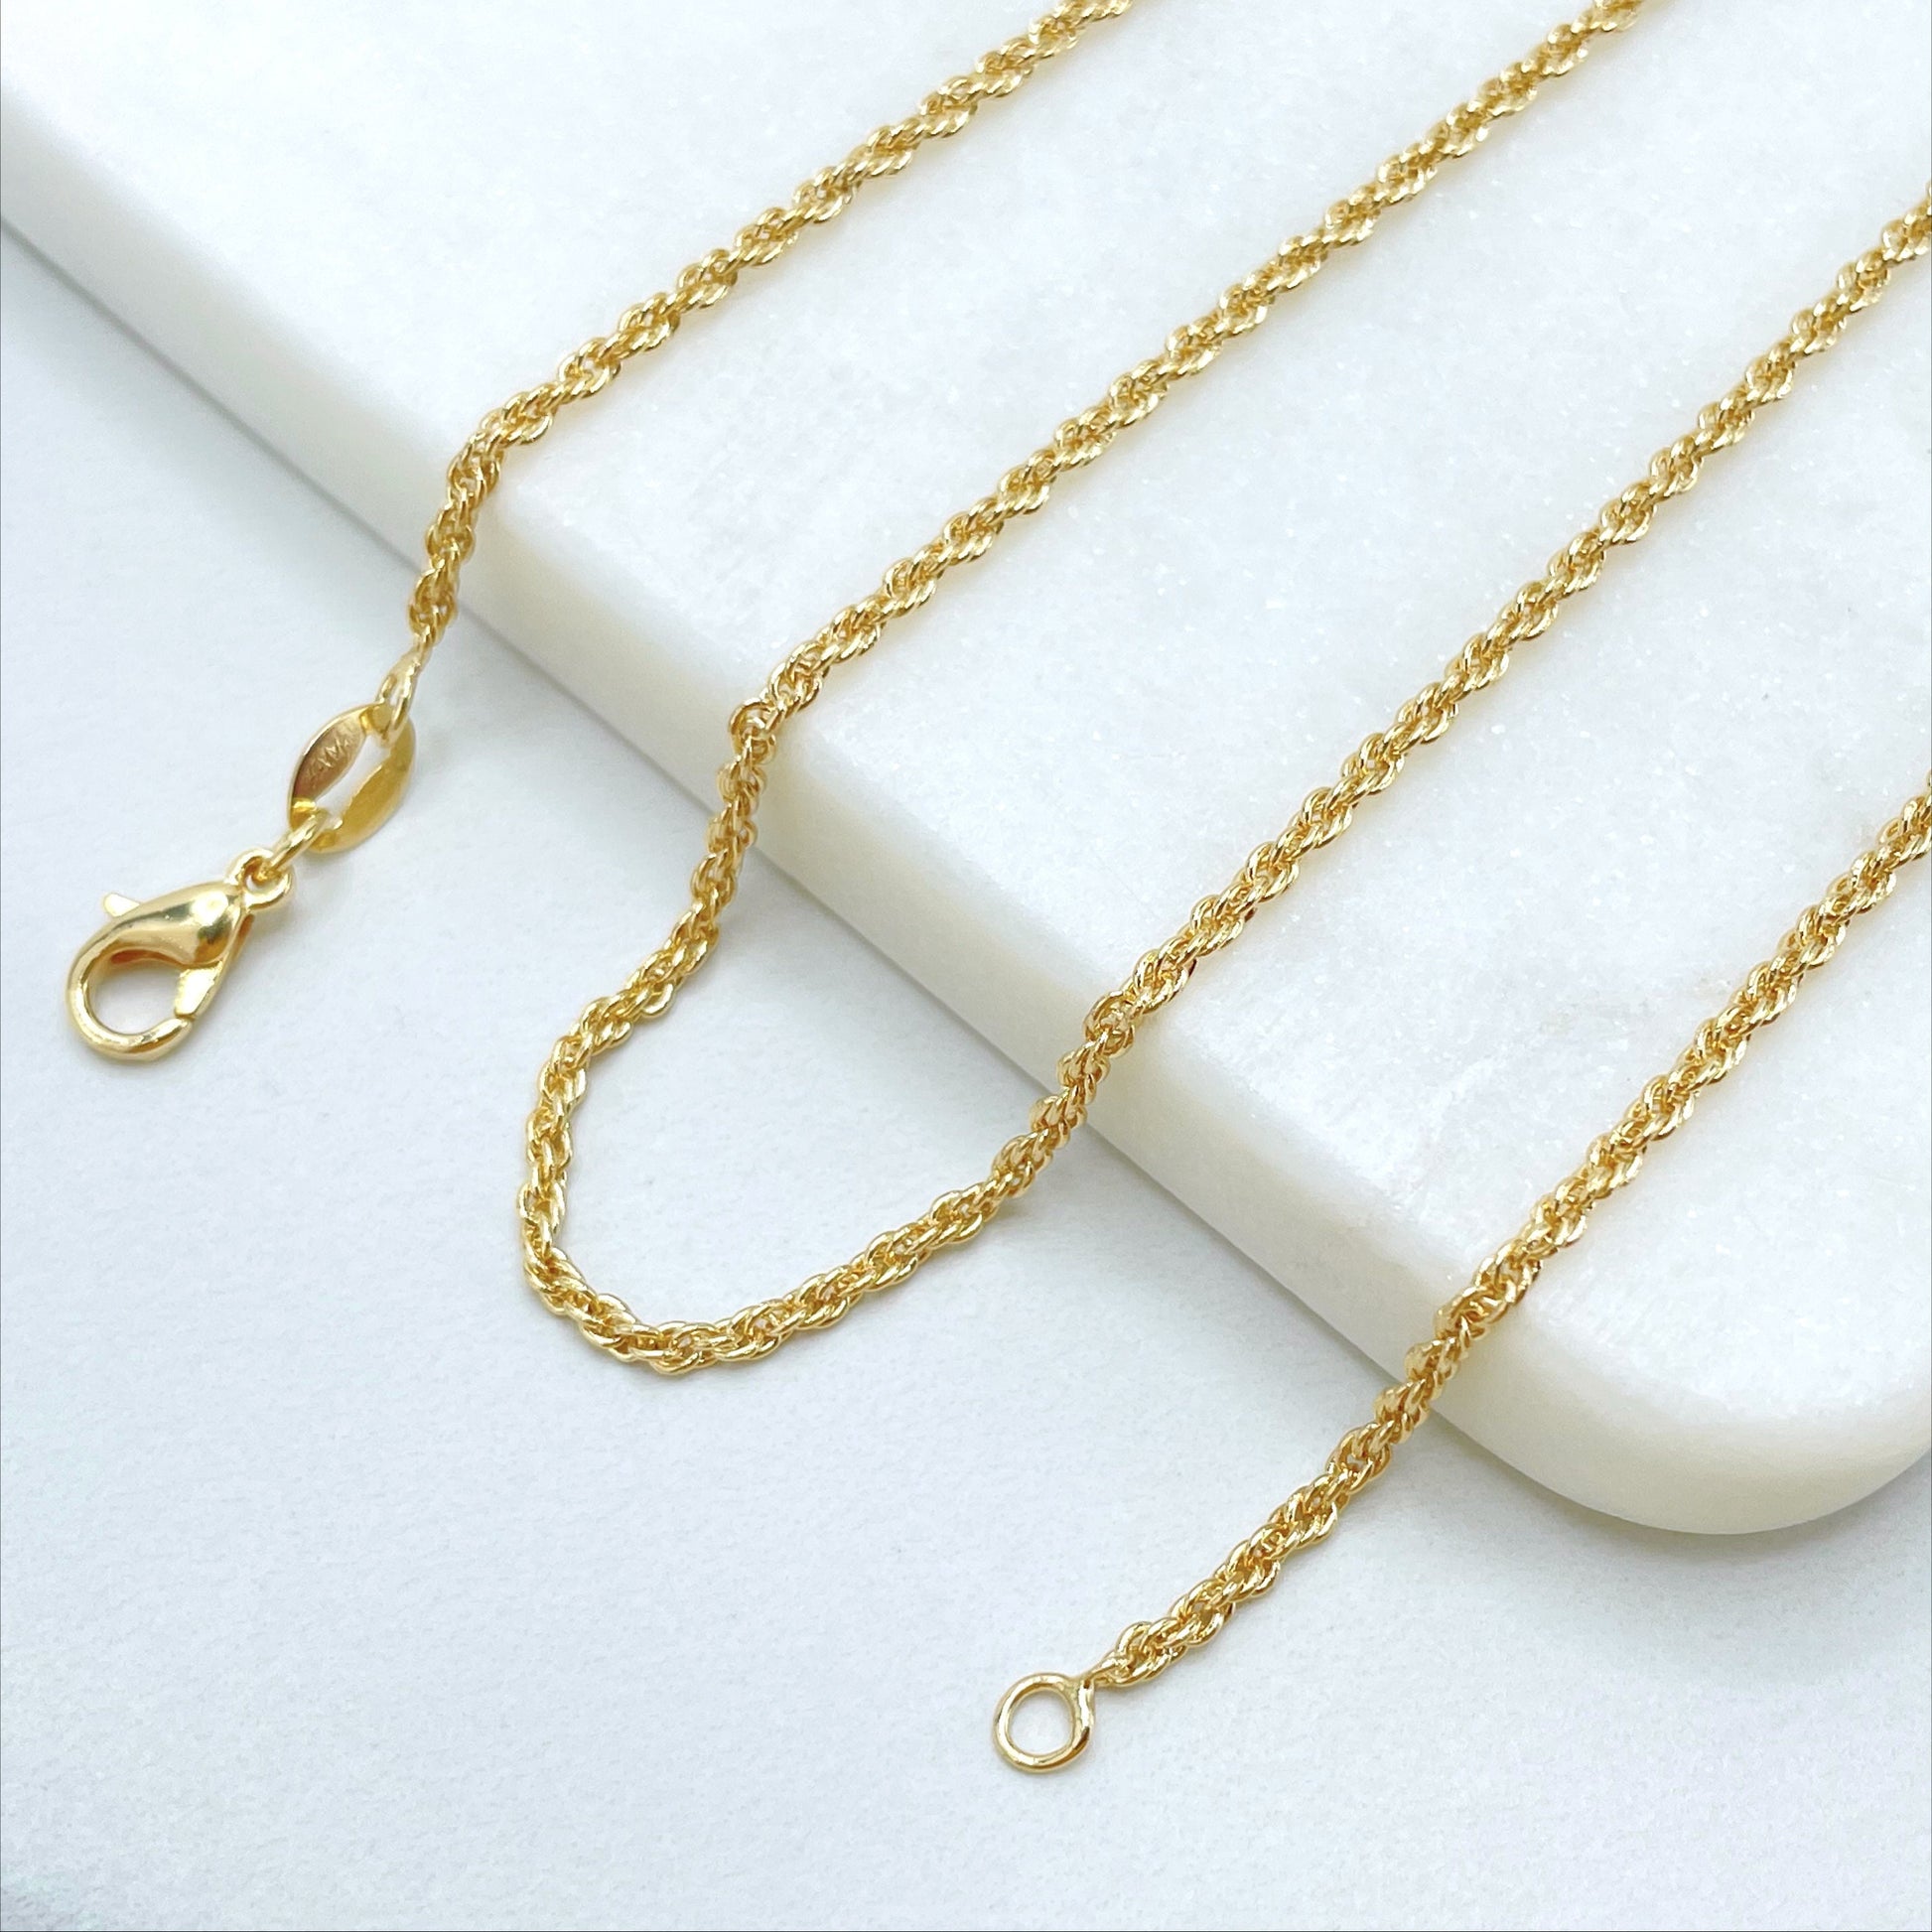 18k Gold Filled Curb Twisted Chain 2mm, Chain 18''or  24''  Wholesale Jewelry Making Supplies